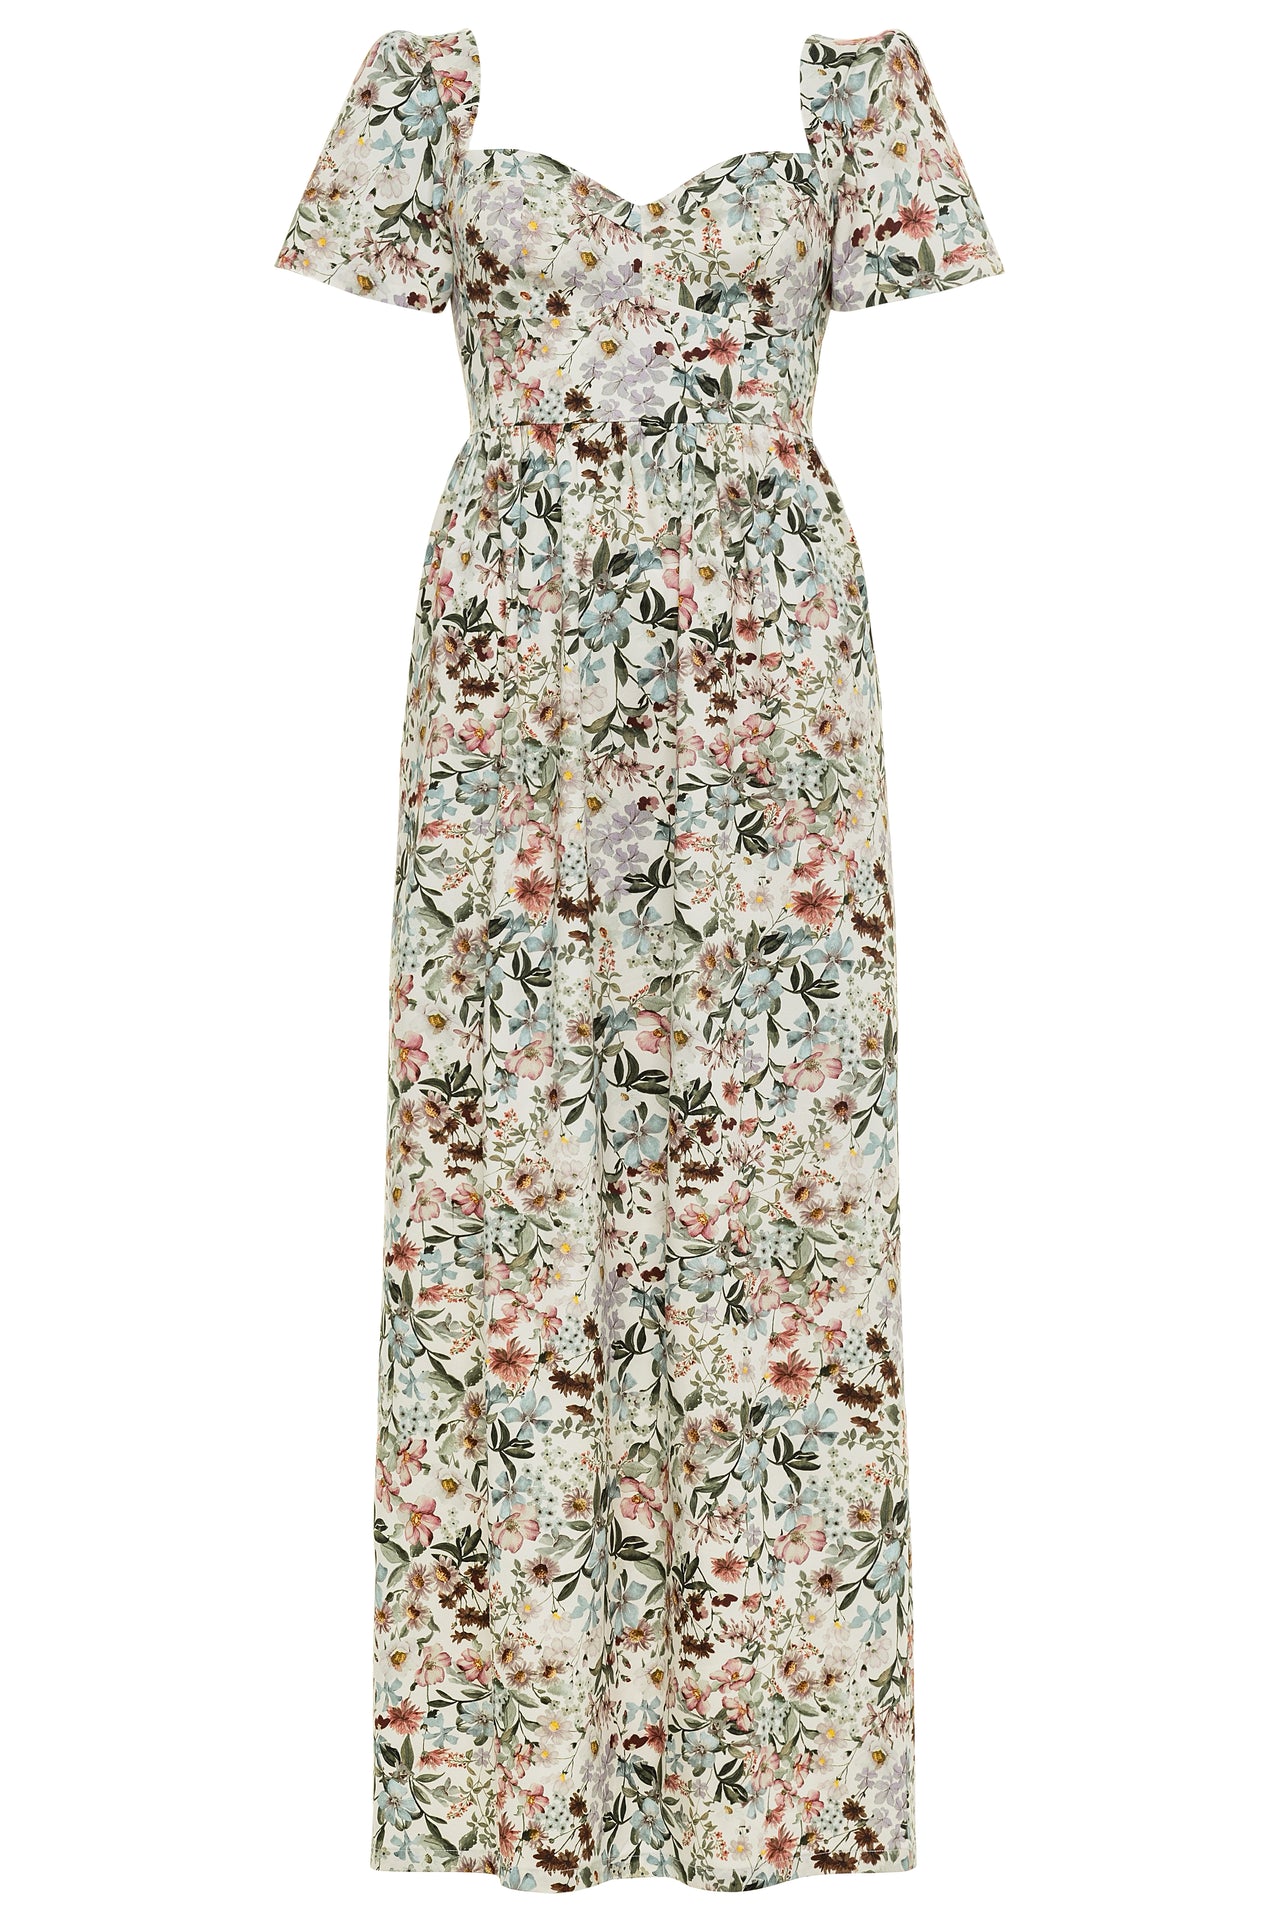 Poppy Maxi Dress with a Sweetheart Neckline and Sculpted Bodice / Vintage White Floral Cotton